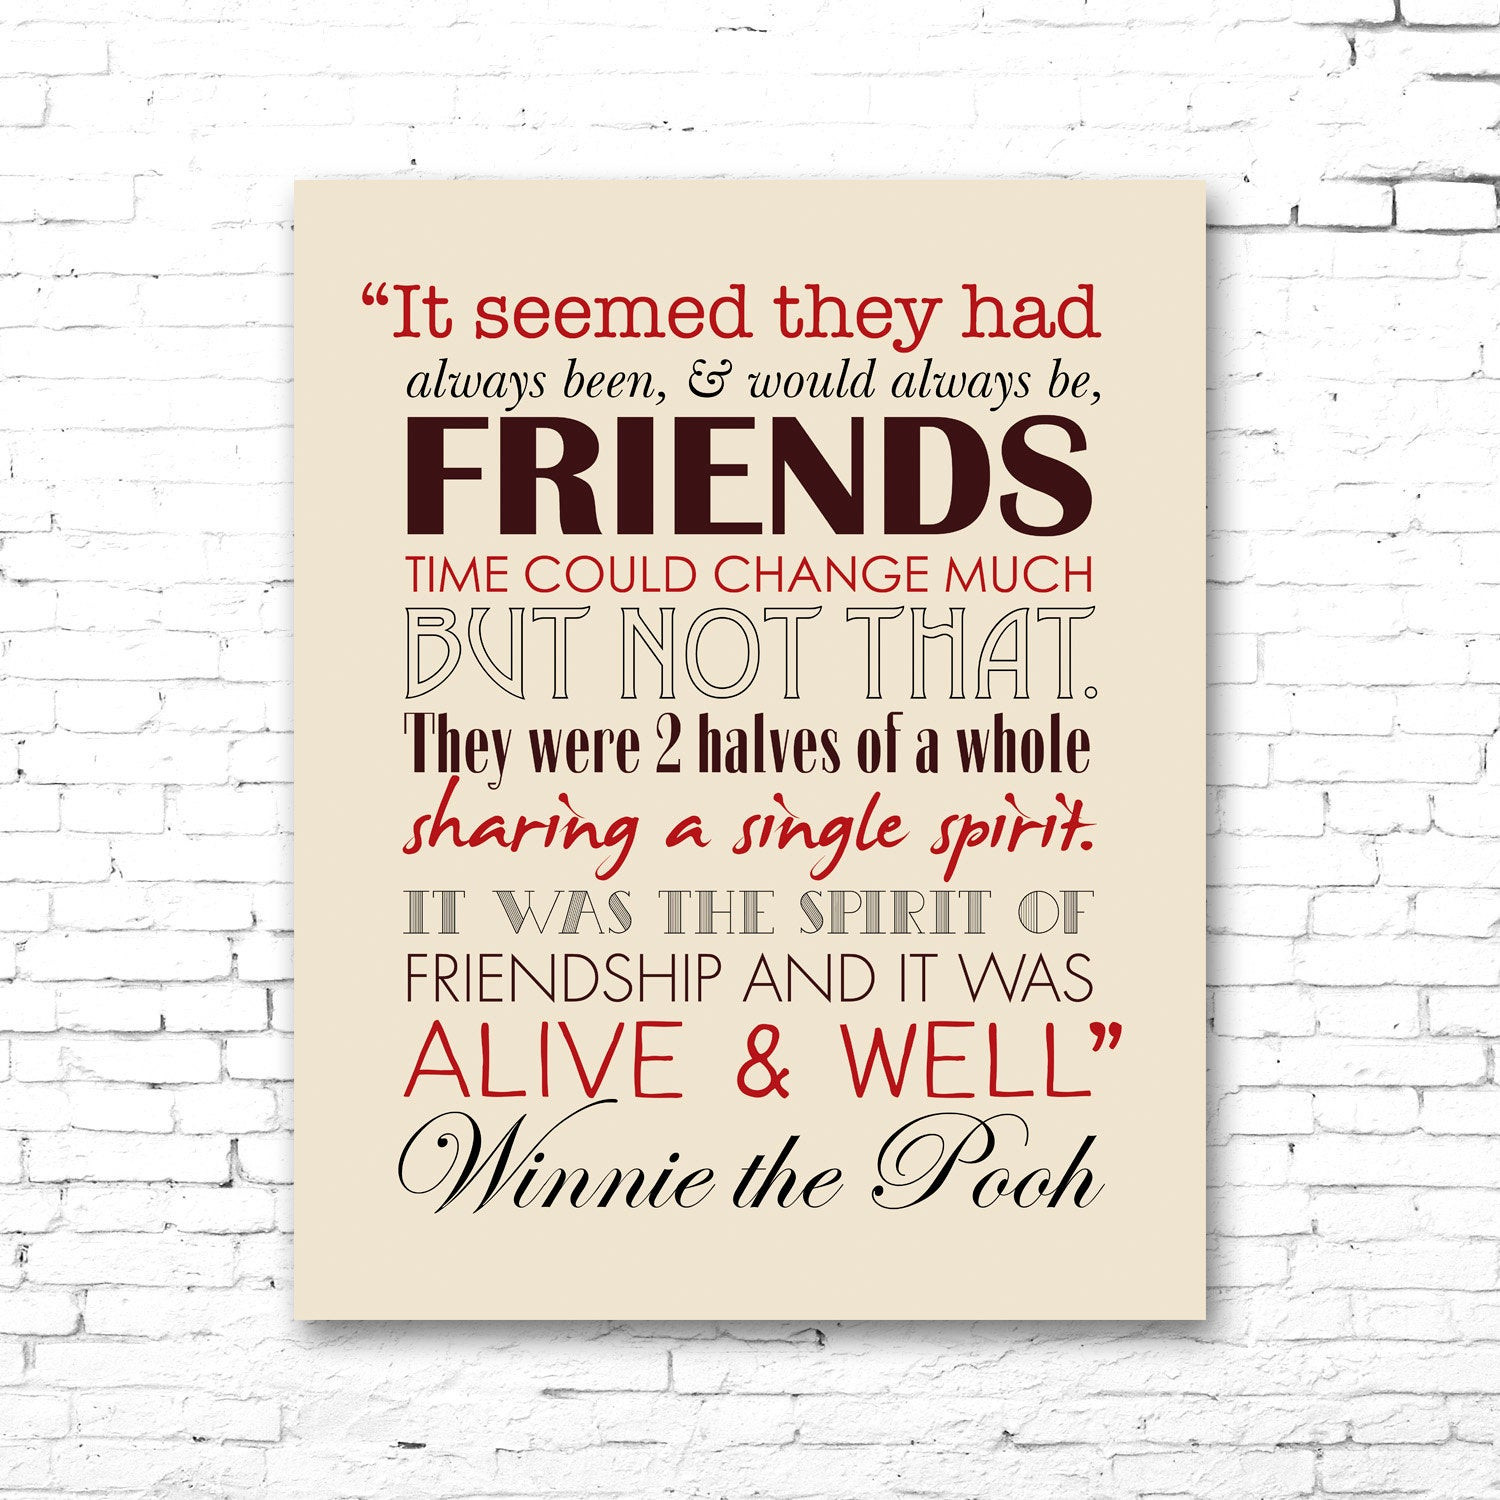 Free Friendship Quotes
 WINNIE The POOH PRINTABLE Friendship Quote Artwork Red